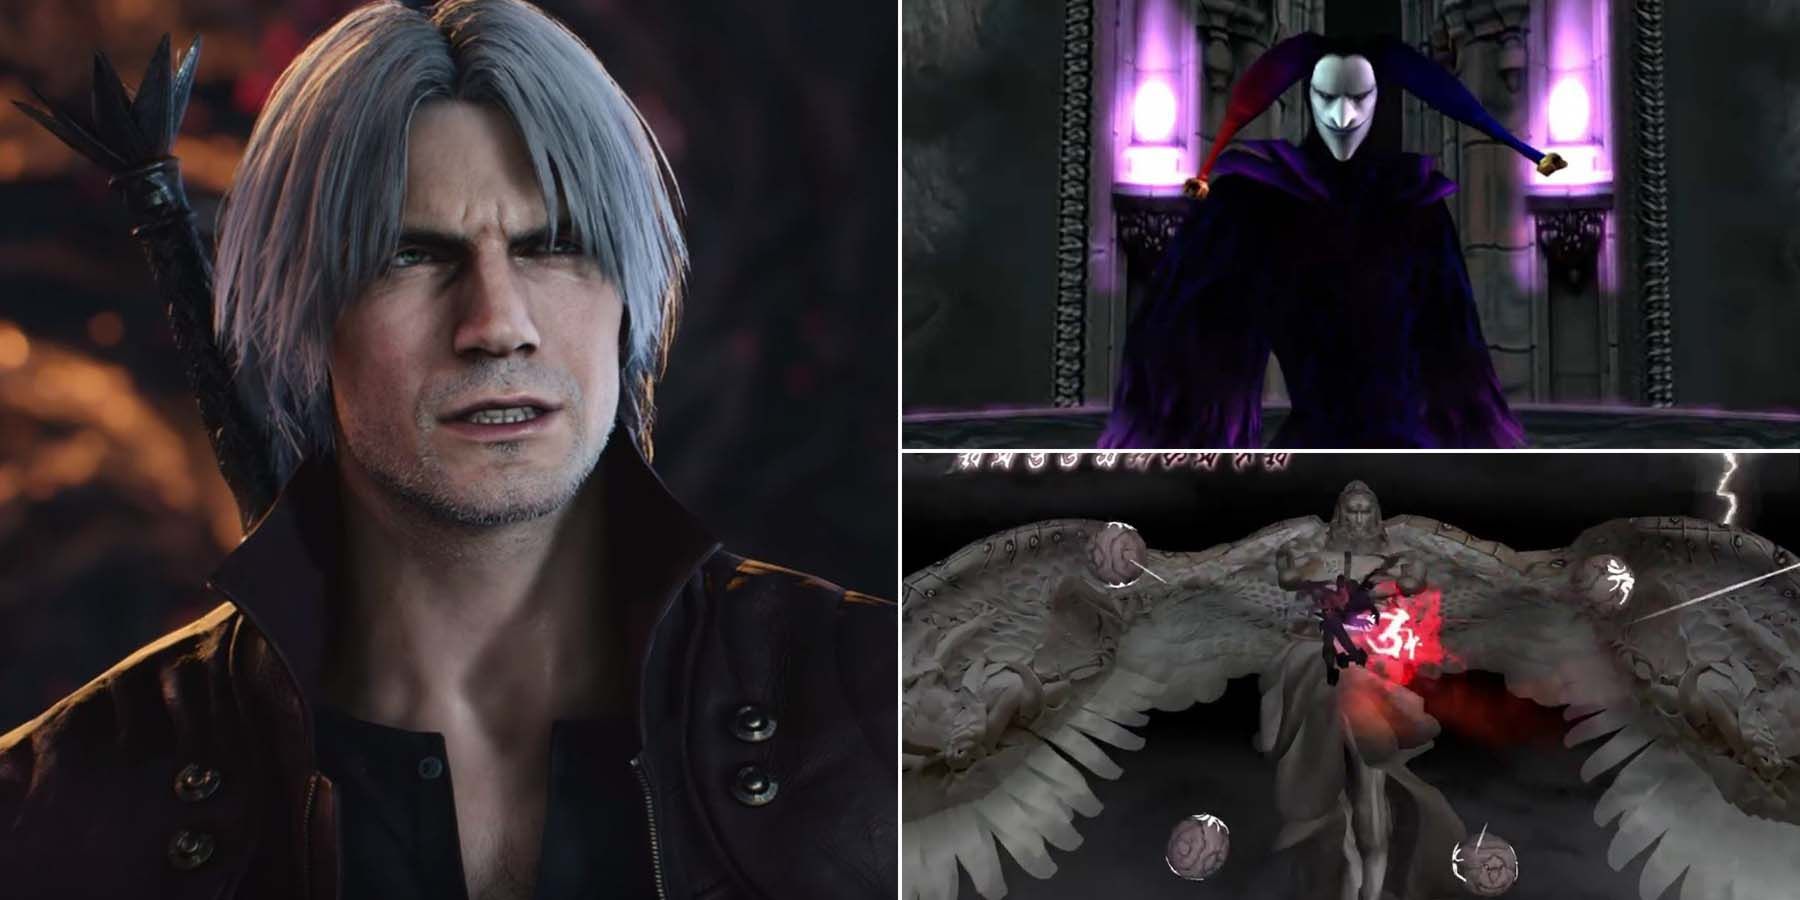 When Is the Release Date for the 'Devil May Cry' Animated Series?